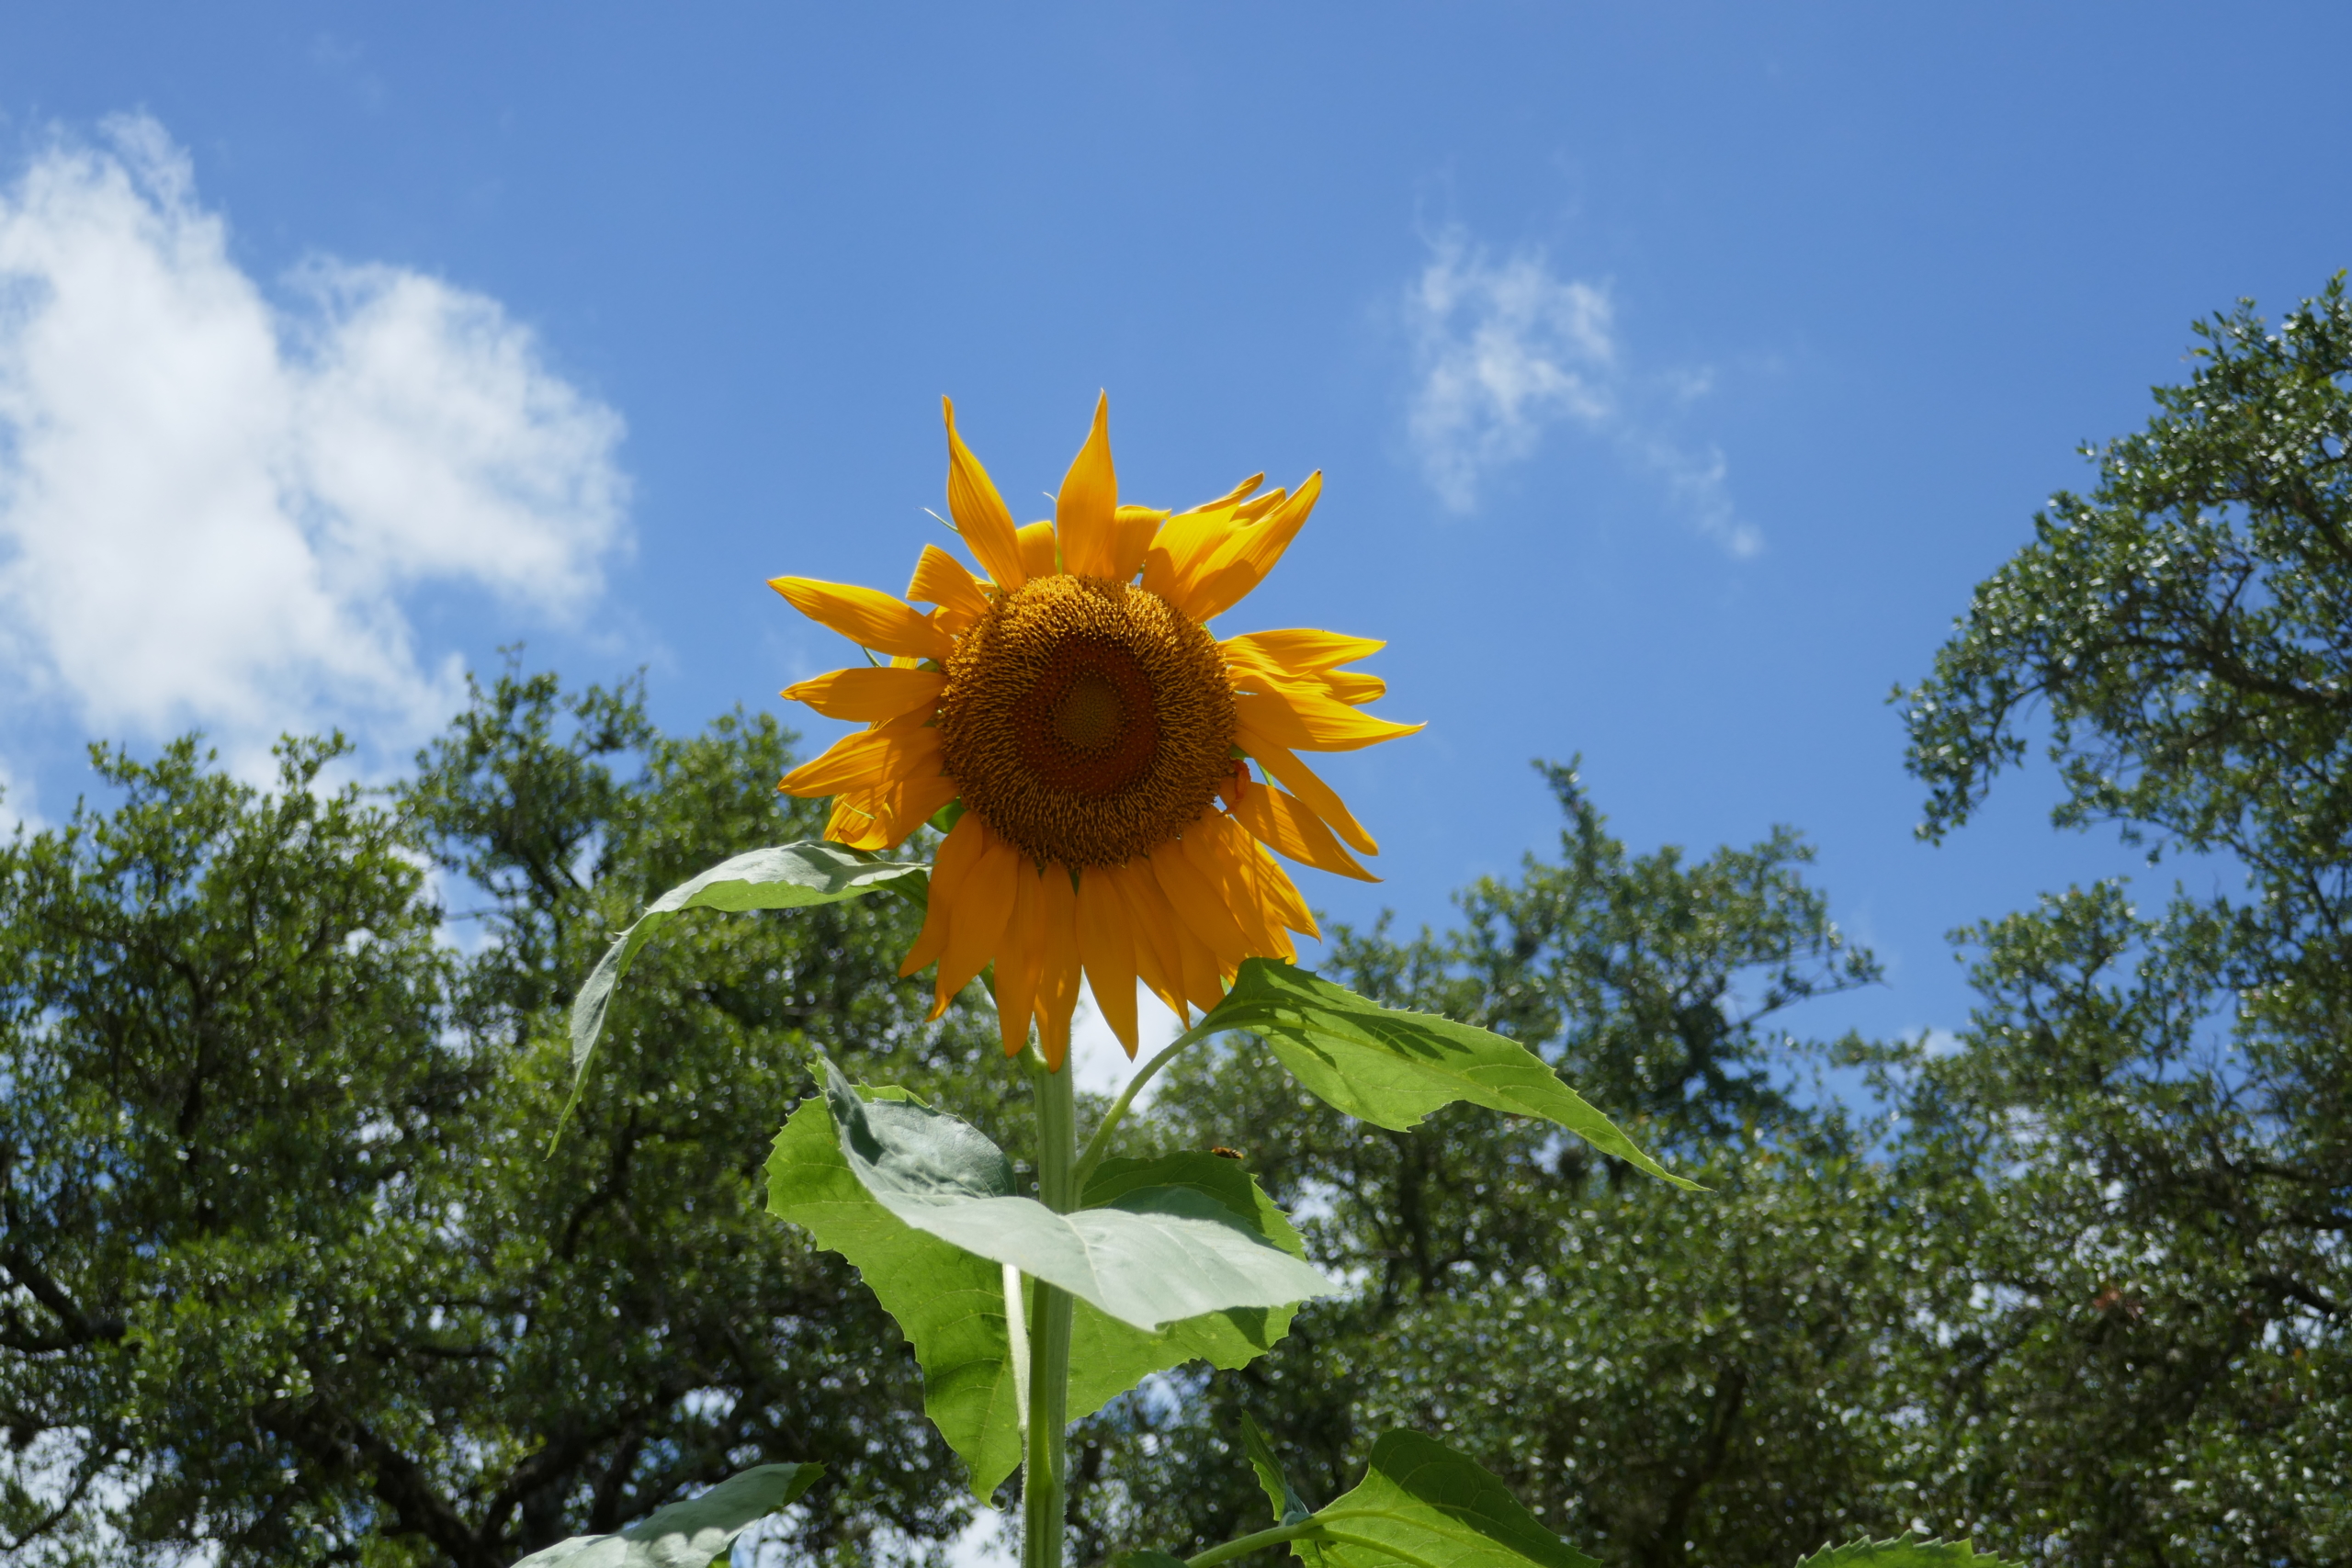 a single large sunflower against a blue sky representing minimalism